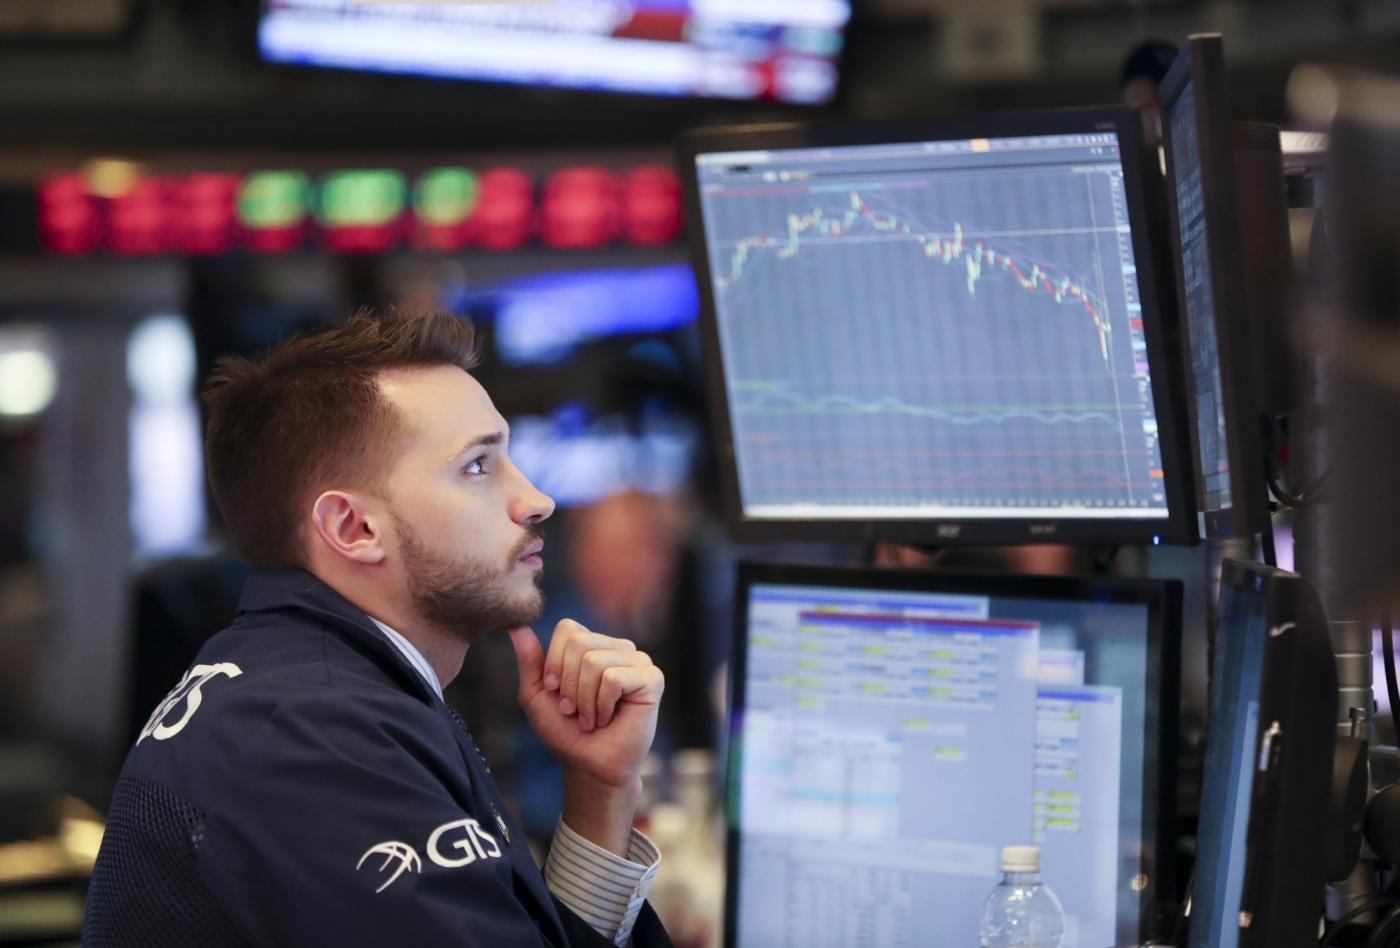 NEW YORK, Feb. 5, 2018 (Xinhua) -- A trader works at the New York Stock Exchange in New York, the United States, on Feb. 5, 2018. U.S. stocks closed sharply lower on Monday, with the Dow plummeting 4.60 percent, as the market took a heavy hit from panic sales. (Xinhua/Wang Ying/IANS) by .